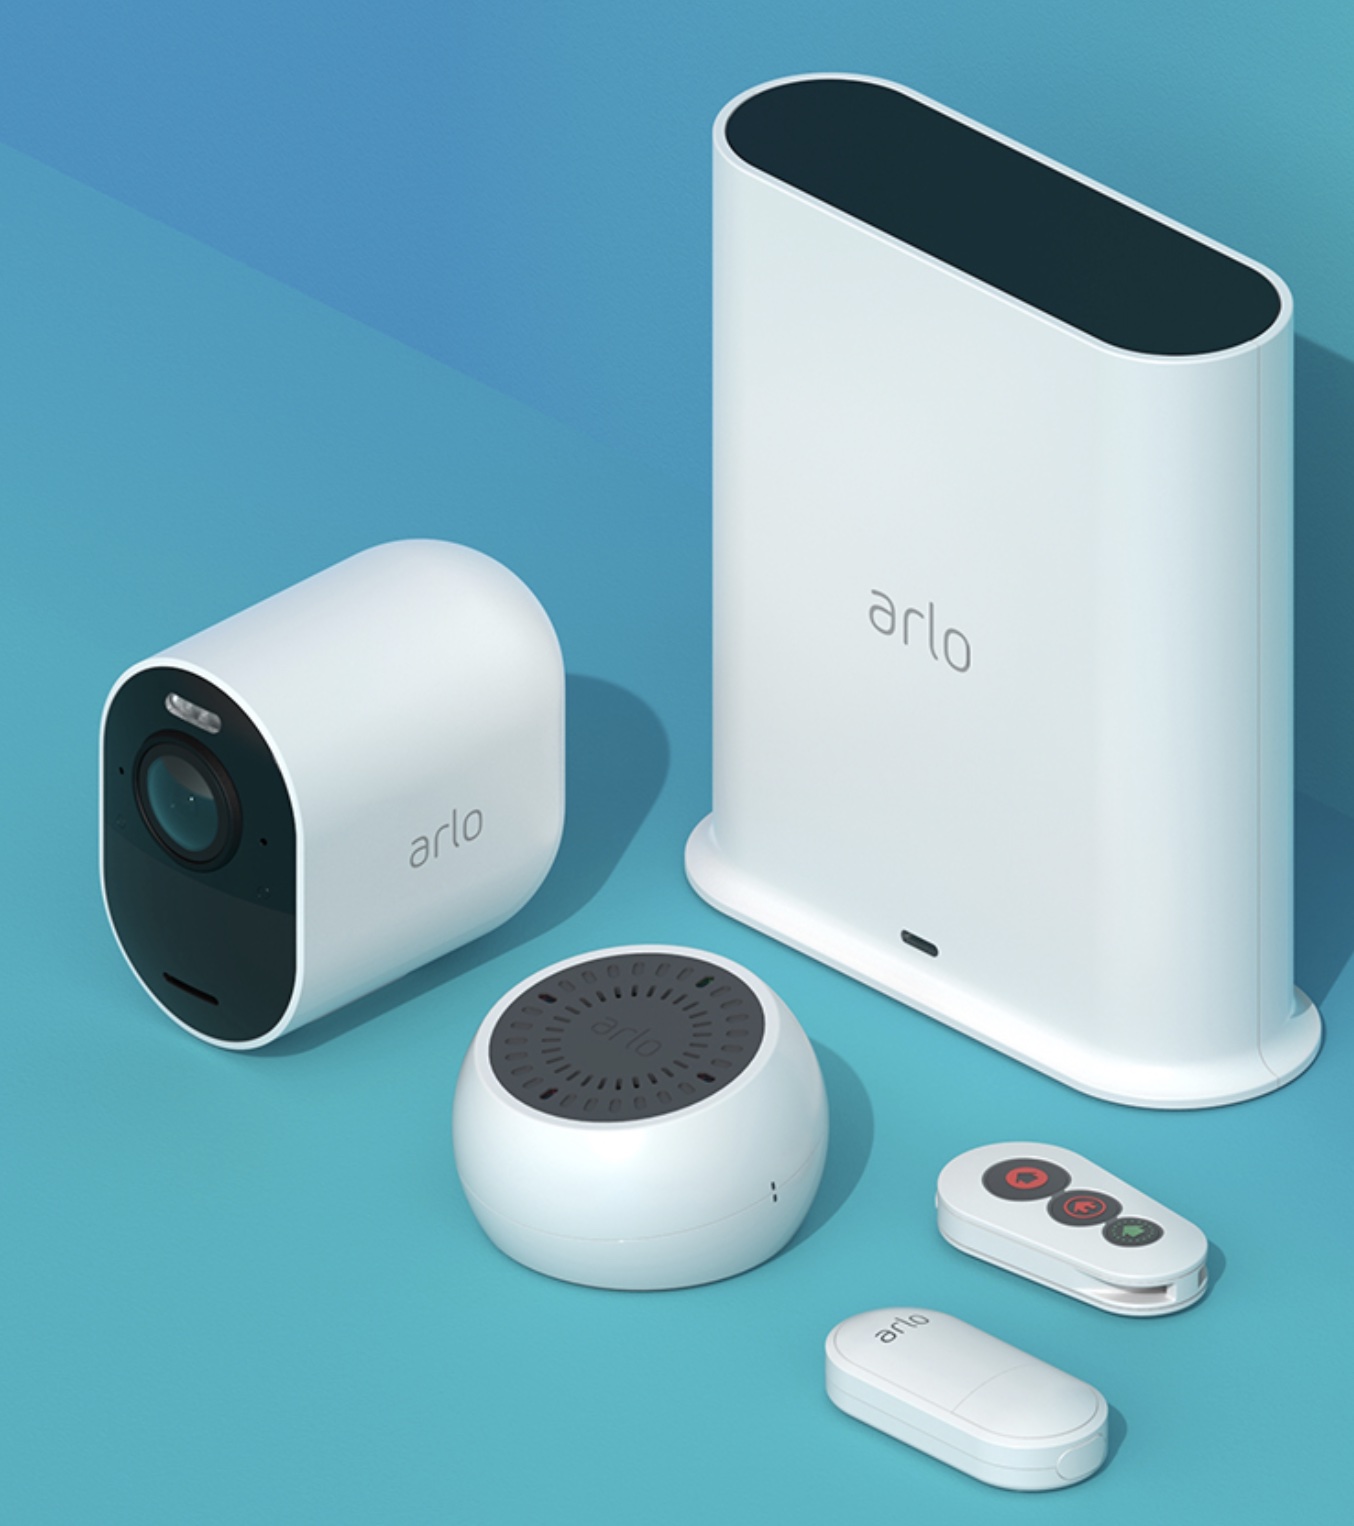 Arlo to add HomeKit support to its wire-free camera systems